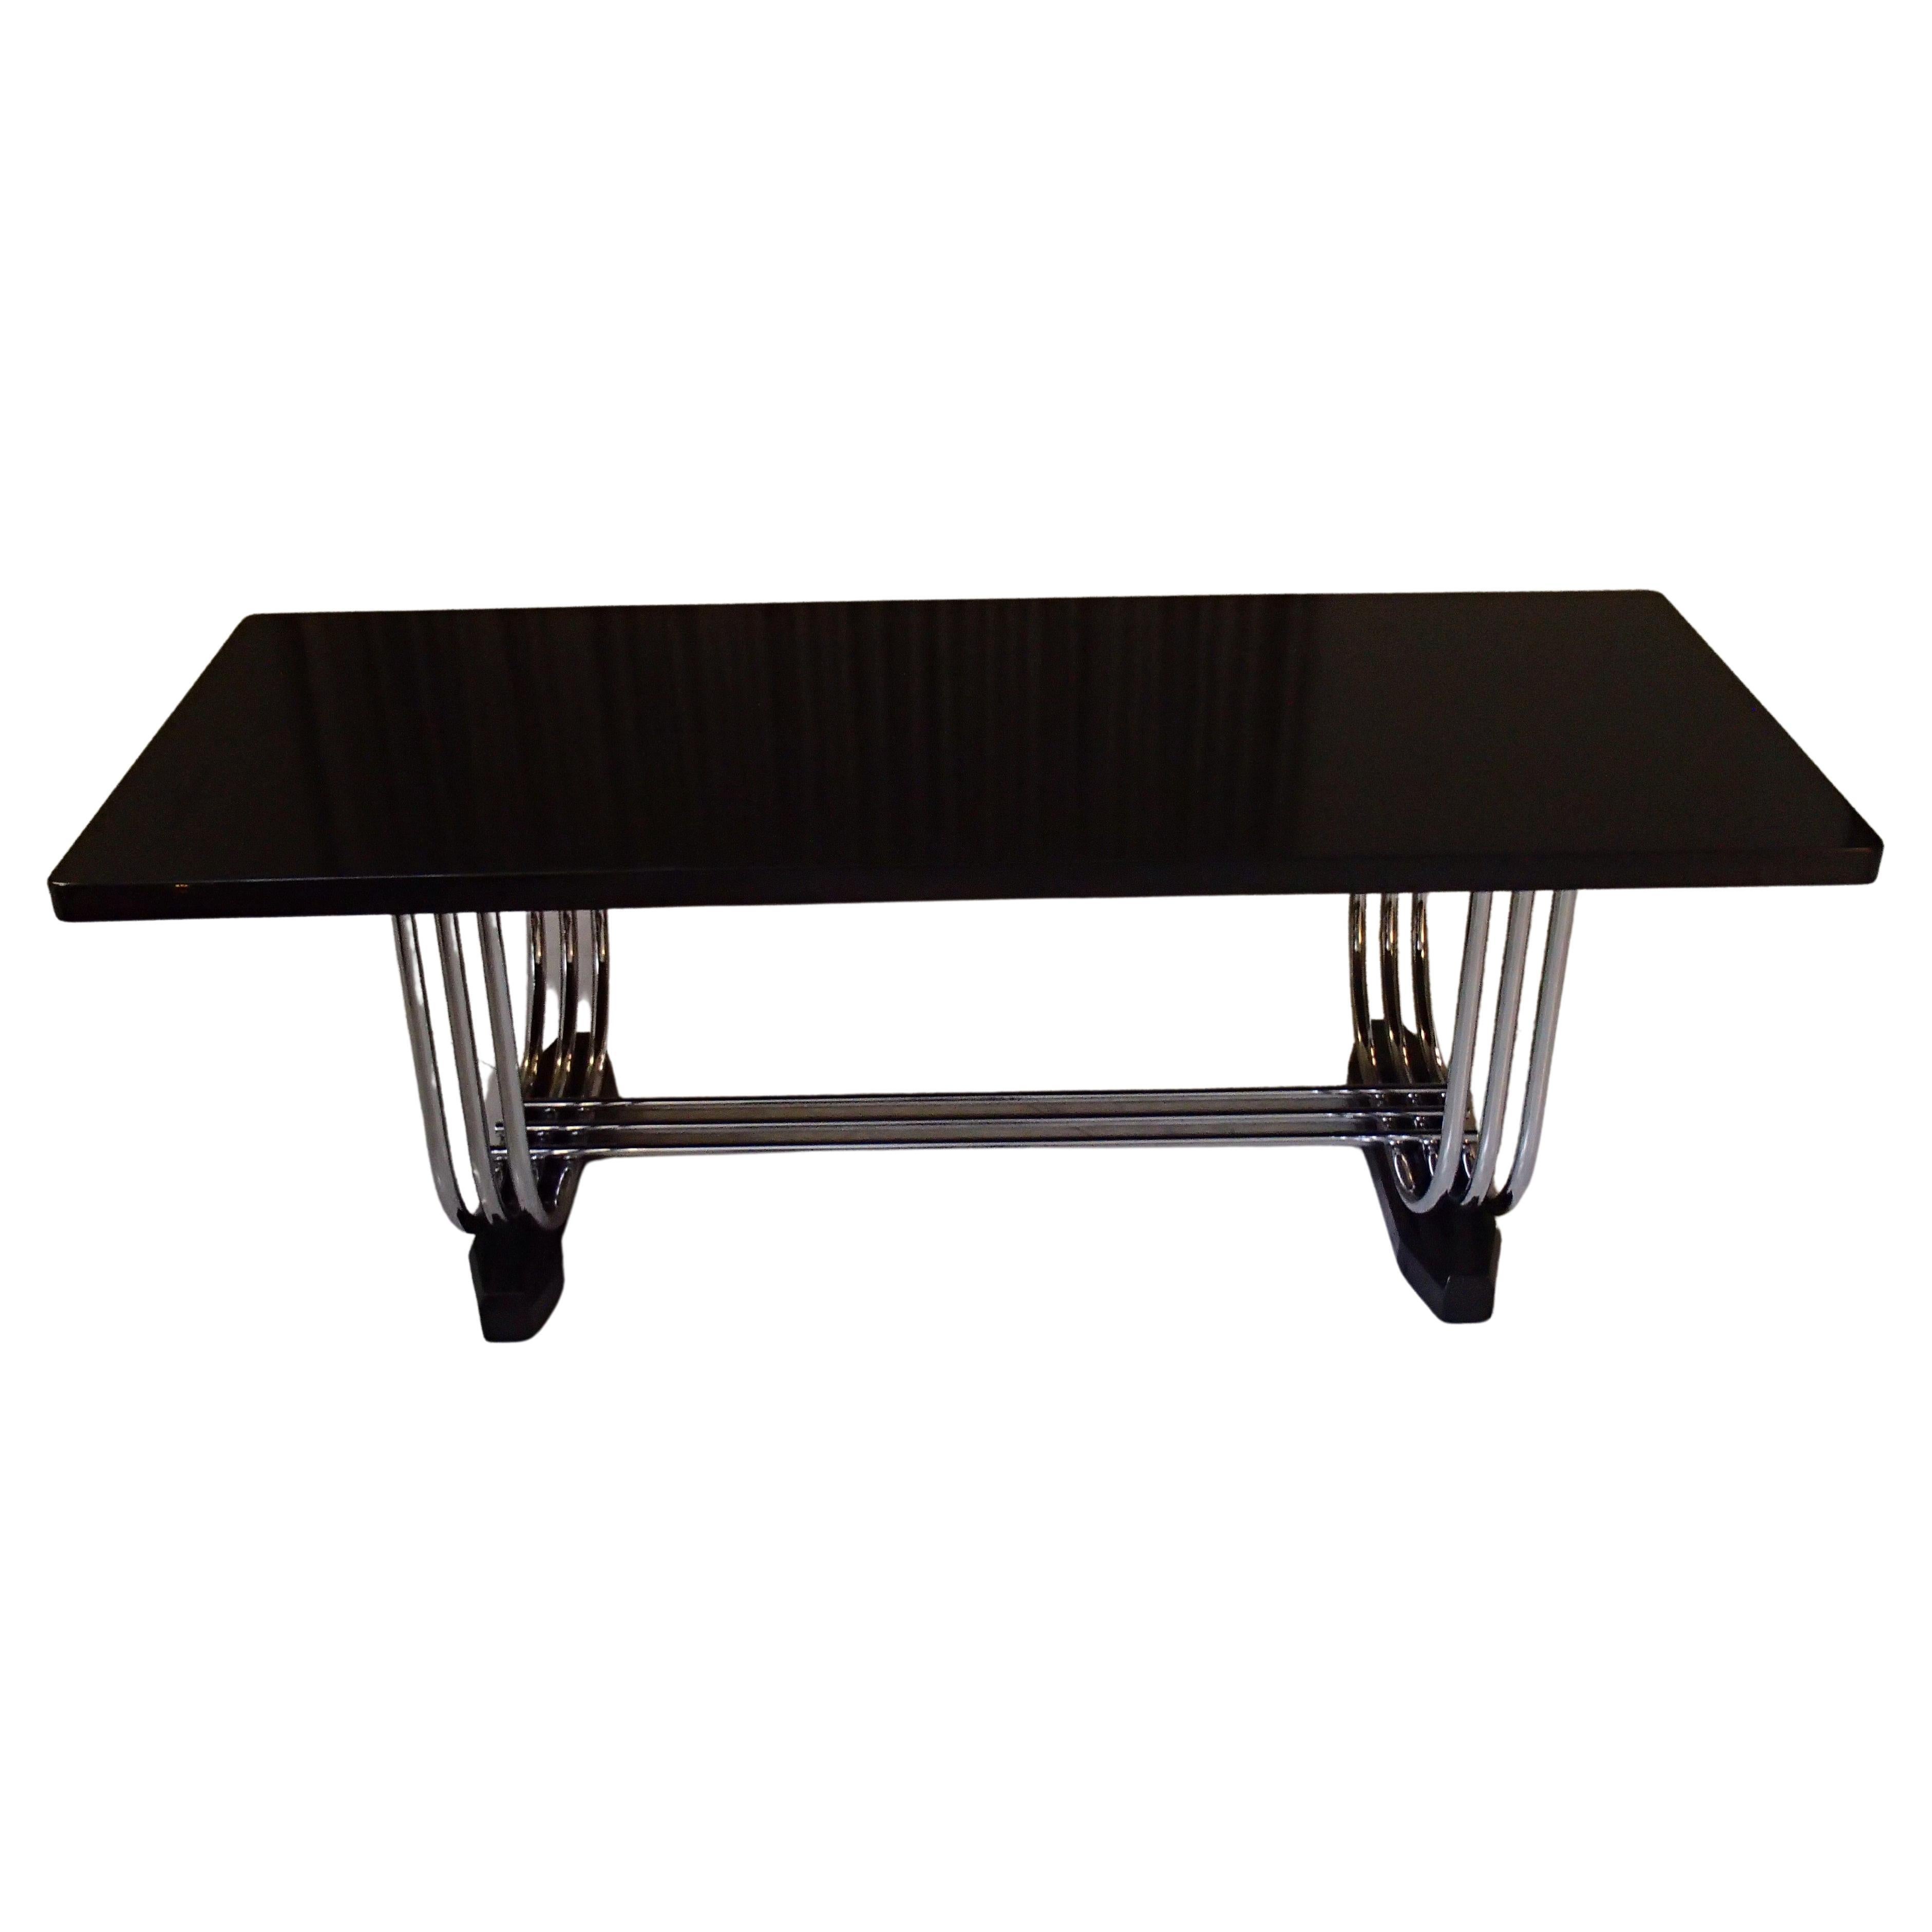 1930thies Tubular Chrome and Blck Top Table for Pel by Serge Chermayeff For Sale